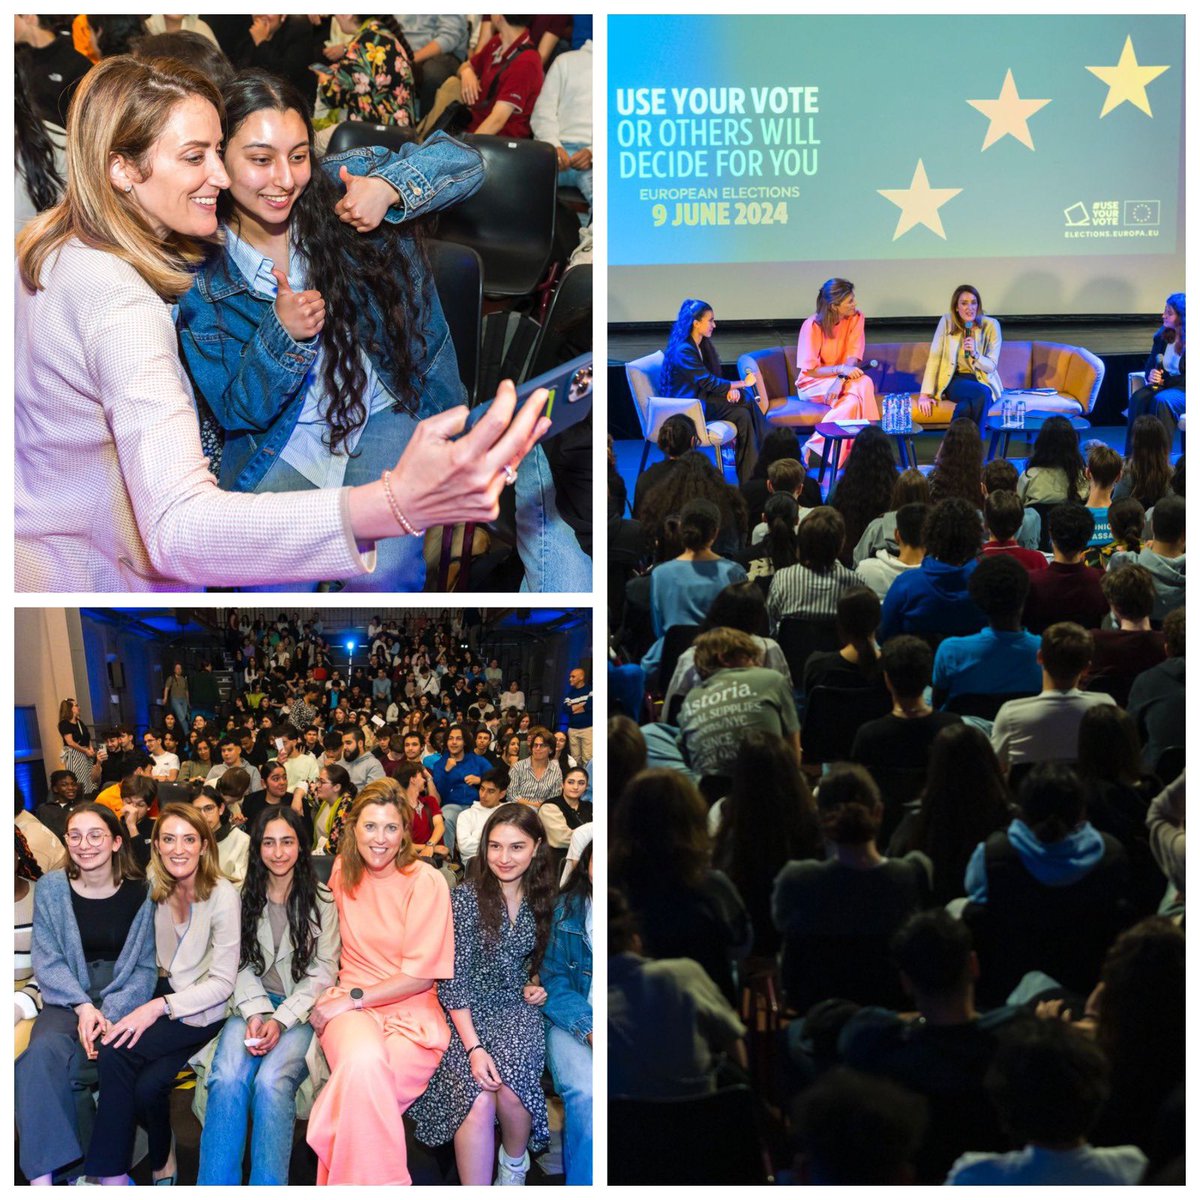 Study. Ask. Vote. That was my message to 16 & 17 year olds who are able to vote for the very first time in #EUelections2024 next month. Thank you for a very interesting discussion at the Go! Kompaz school in Zaventem 🇪🇺🇧🇪 Europe is you! Shape it. Vote for it. Be proud of it.